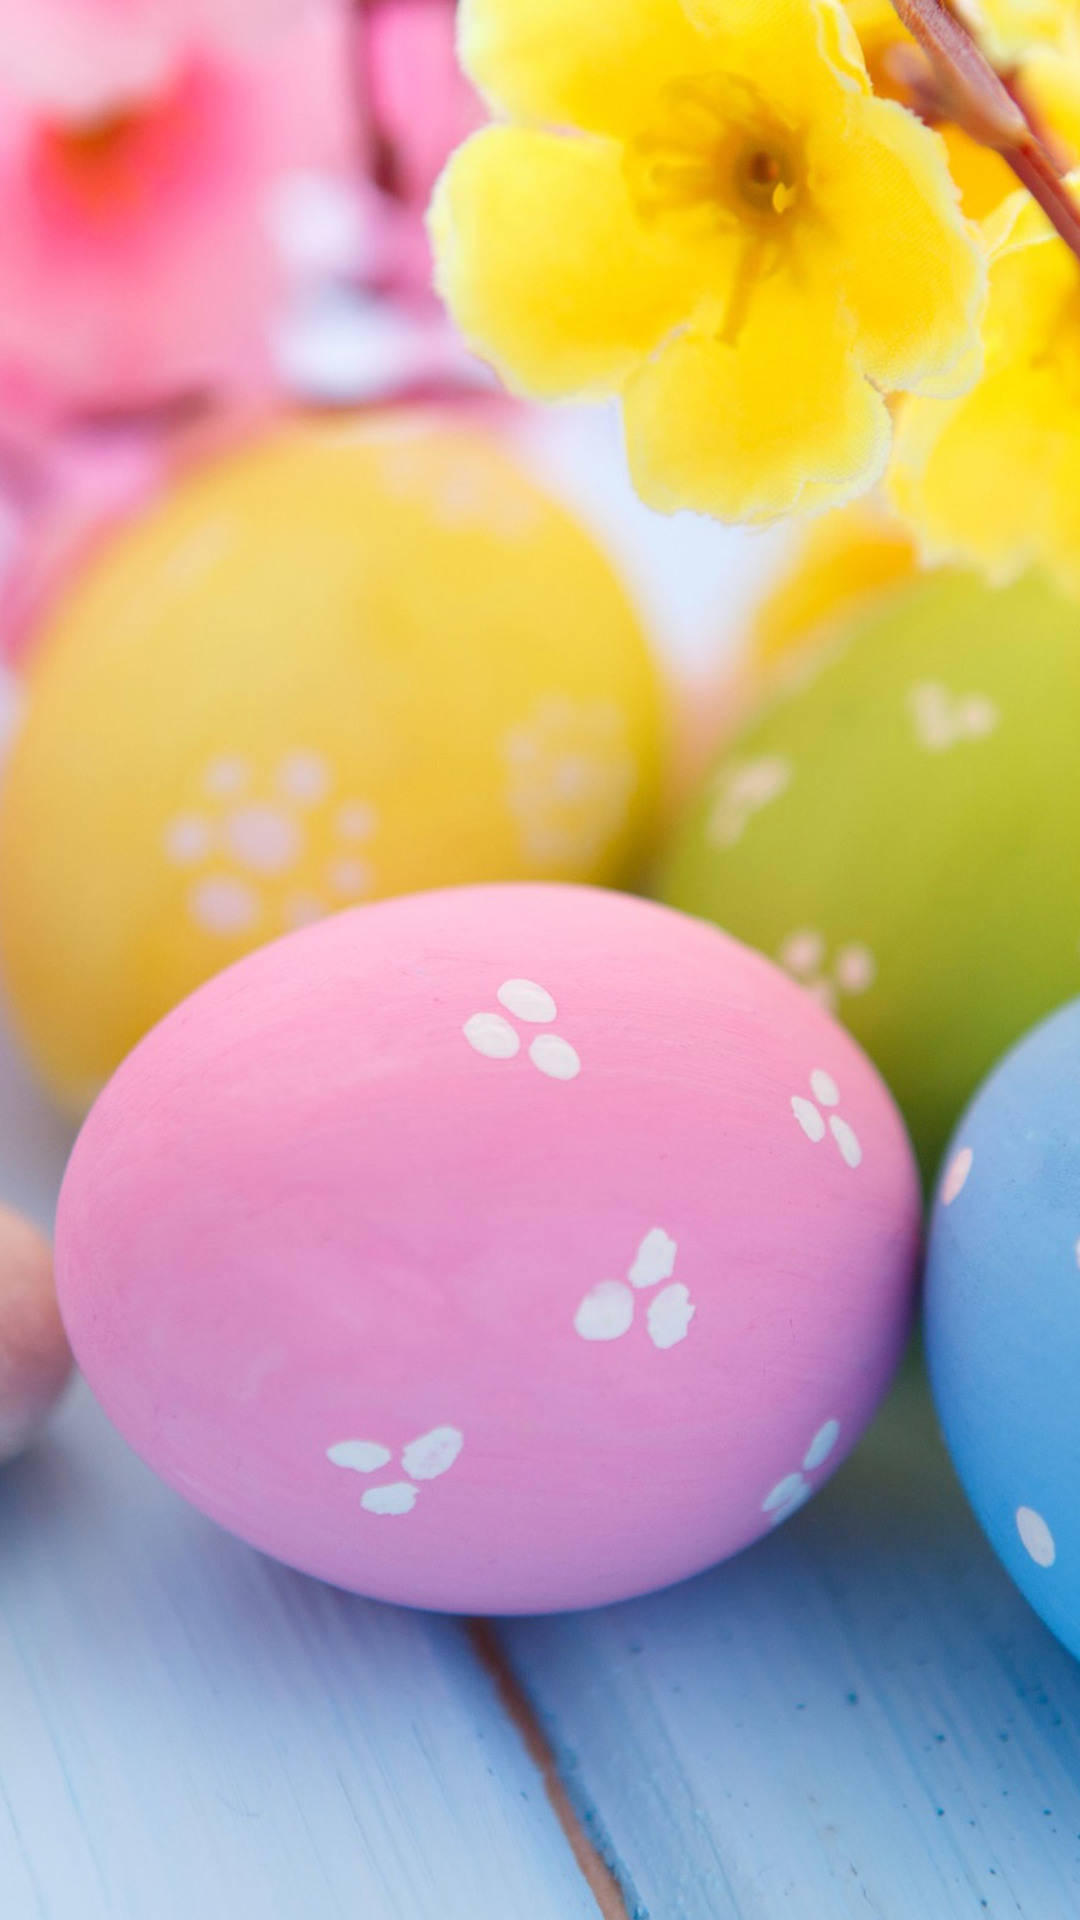 "Celebrate Easter with this beautiful iPhone wallpaper!" Wallpaper